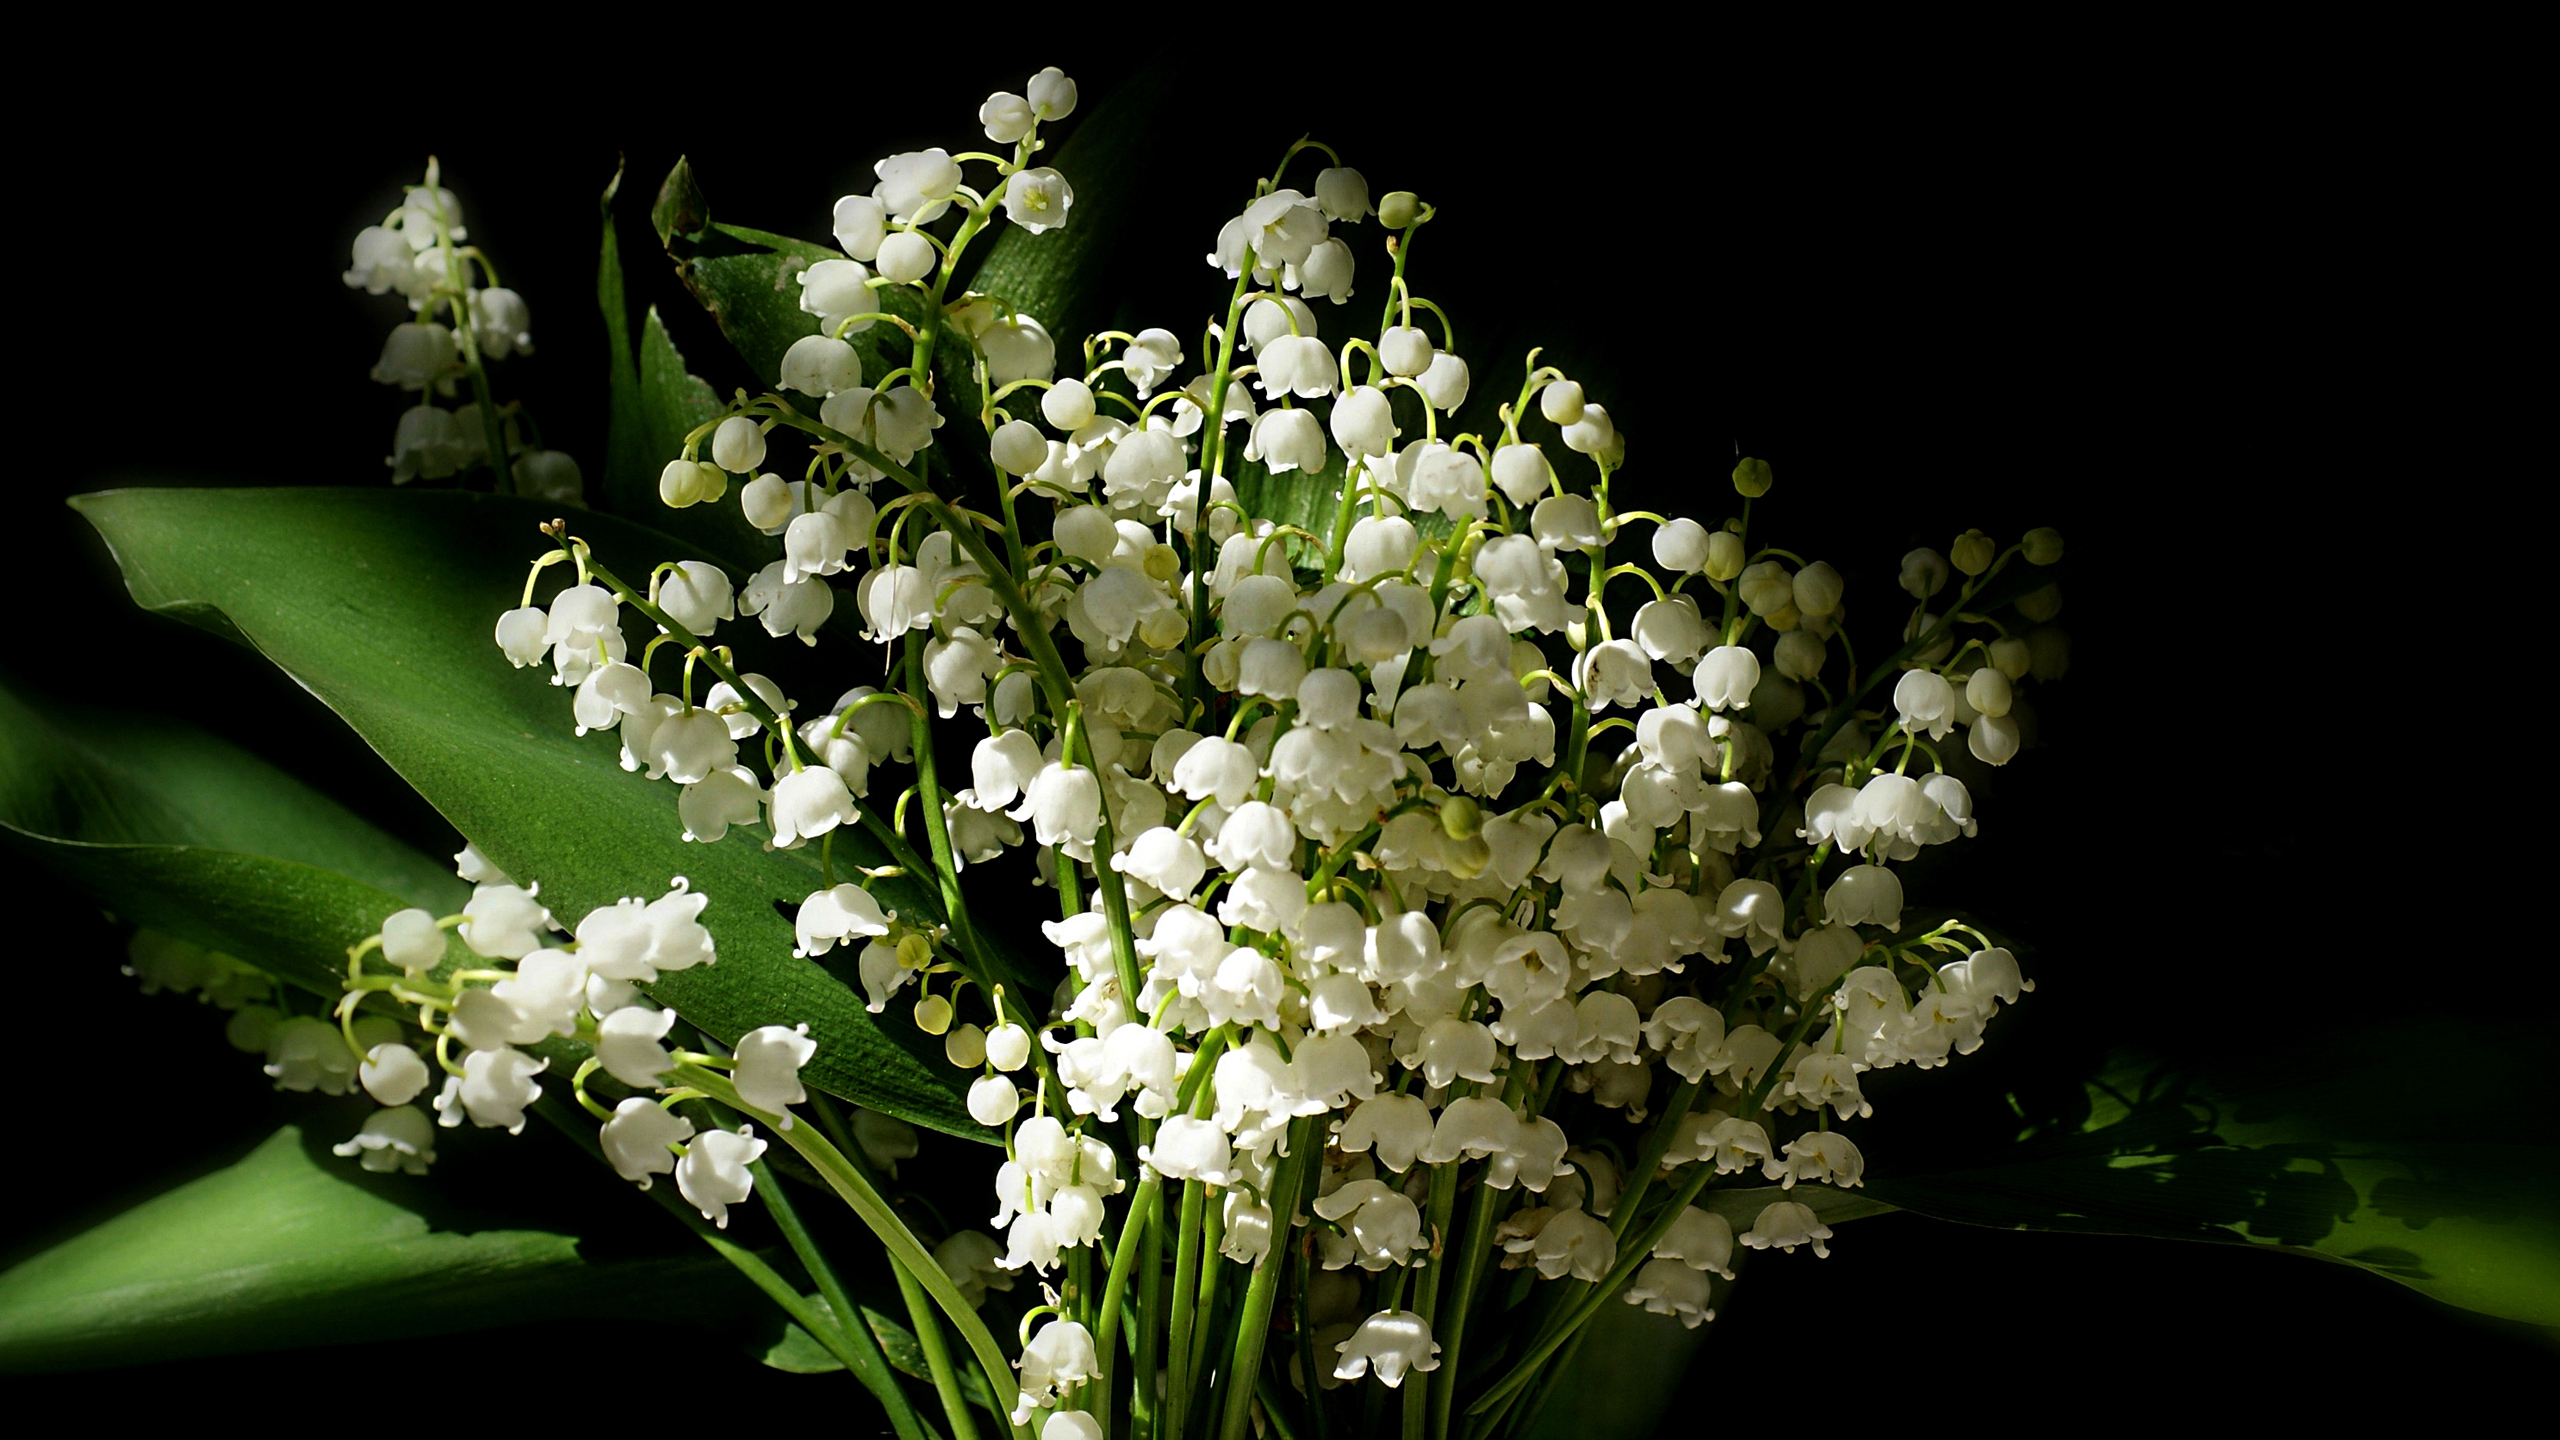 White Lily Of The Valley Flowers Green Leaves In Black Wallpaper 2K Flowers